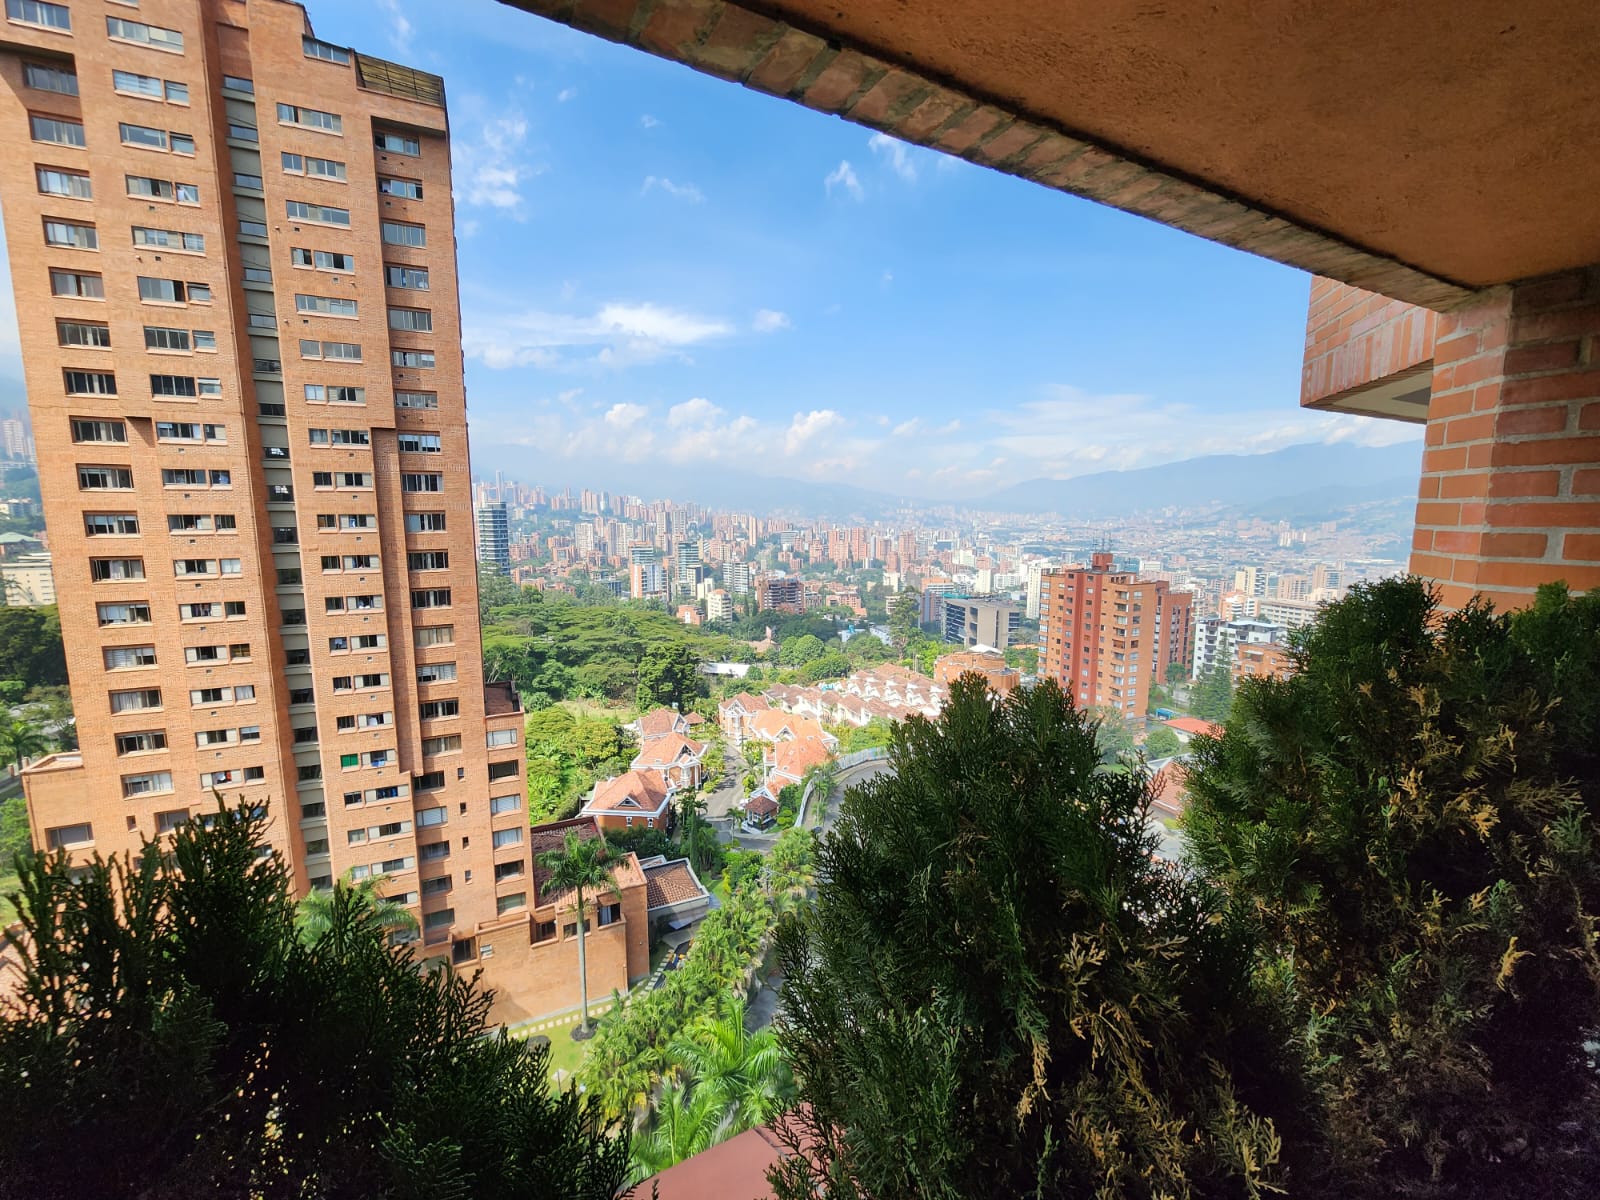 Two Level, 4,736 Sq Ft El Poblado 4 BR Remodeled Condo With Valley Views and Multiple Balconies